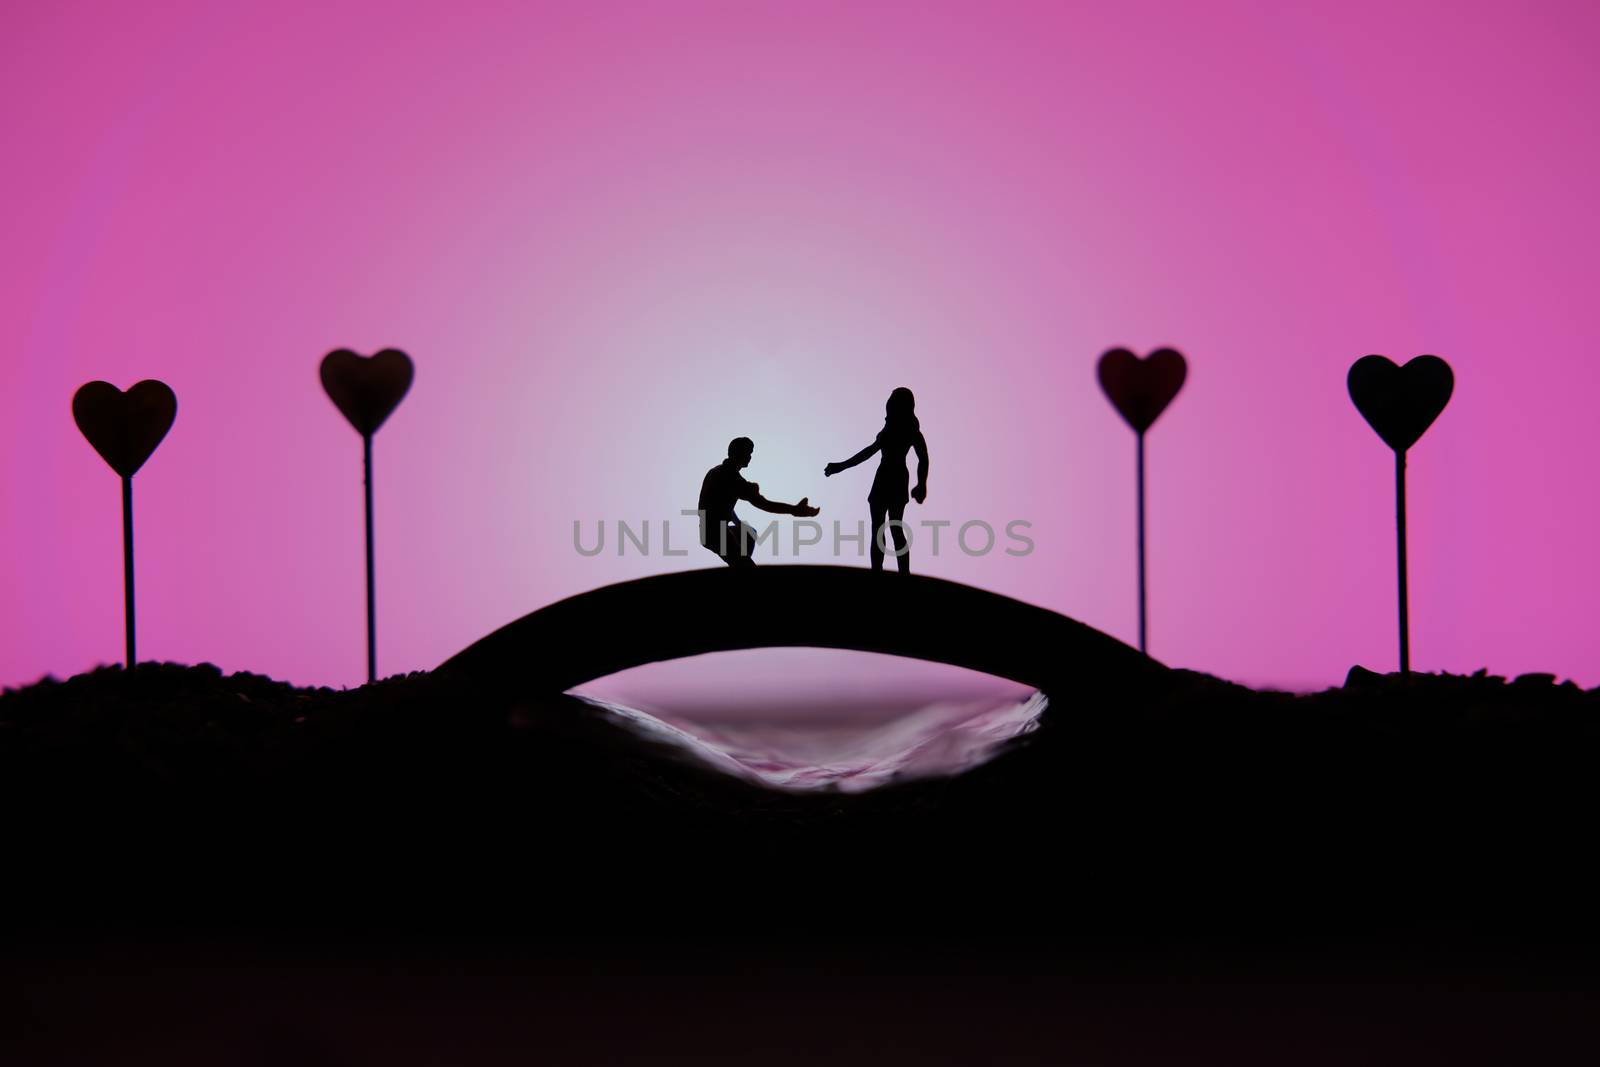 miniature people / toy photography - conceptual valentine holiday illustration. A man proposing a girl silhouette above the bridge with heart lamp by Macrostud